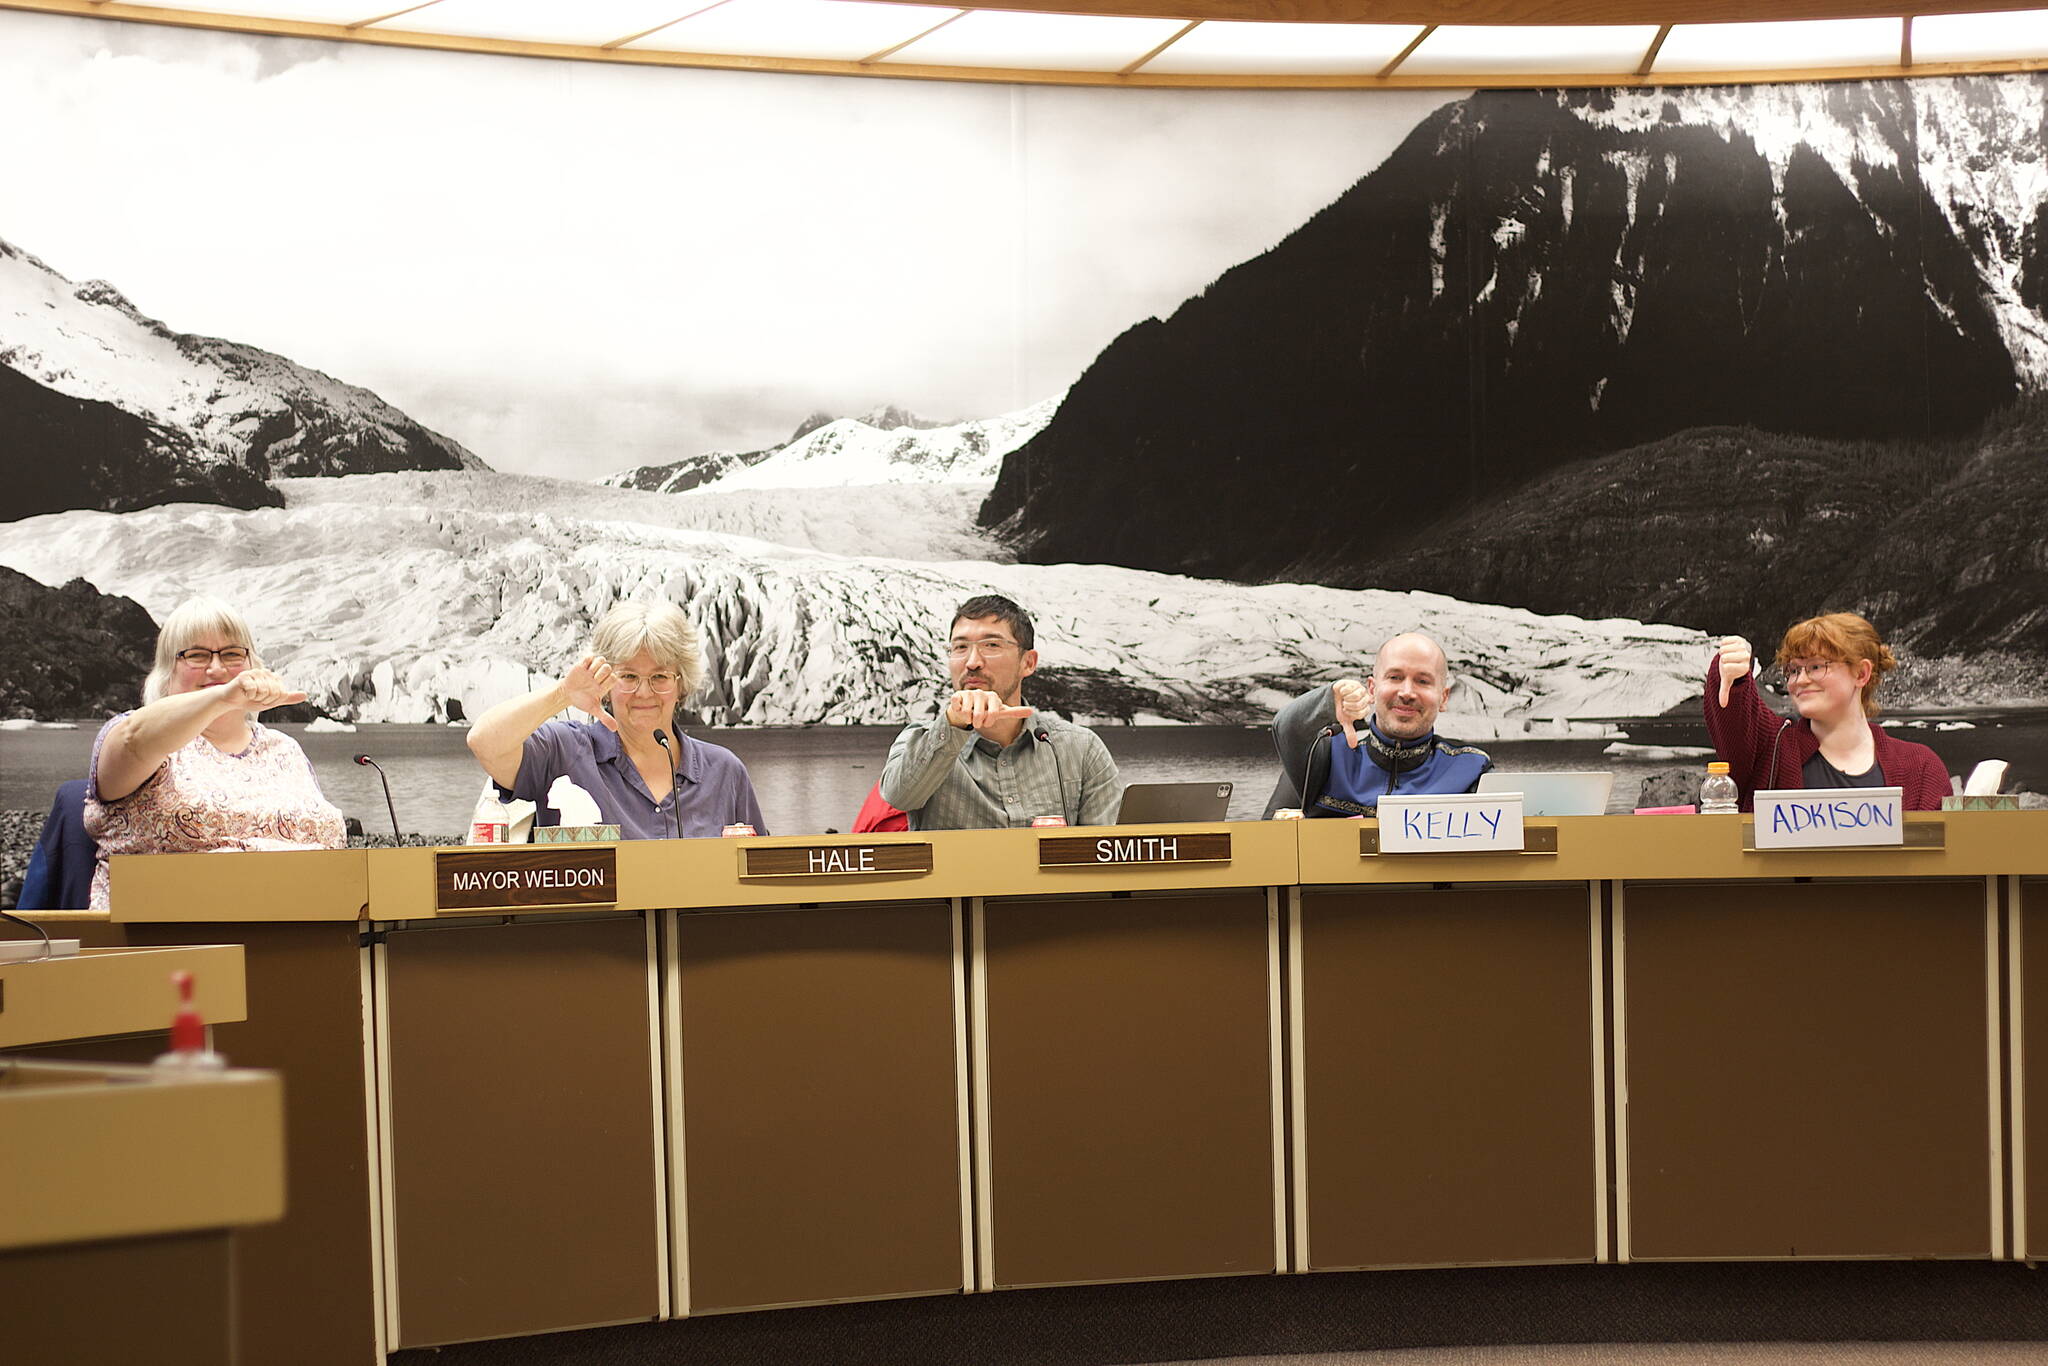 Juneau Assembly members cast an informal vote during a Committee of the Whole meeting Monday night about the volume of cruise tourism they want to see in Juneau in future years. Mayor Beth Weldon (left) and Assembly member Greg Smith (middle) cast neutral votes essentially favoring an as-is approach, while Michelle Bonnet Hale, Paul Kelly and Ella Adkison suggesting they prefer lower numbers than the record 1.66 million passengers that visited this year. Votes by the other four members included one as-is and three “thumbs down,” for a 6-3 vote in favor of the city’s tourism director exploring a strategy for 2026 and beyond that results in fewer annual cruise visitors. (Mark Sabbatini / Juneau Empire)